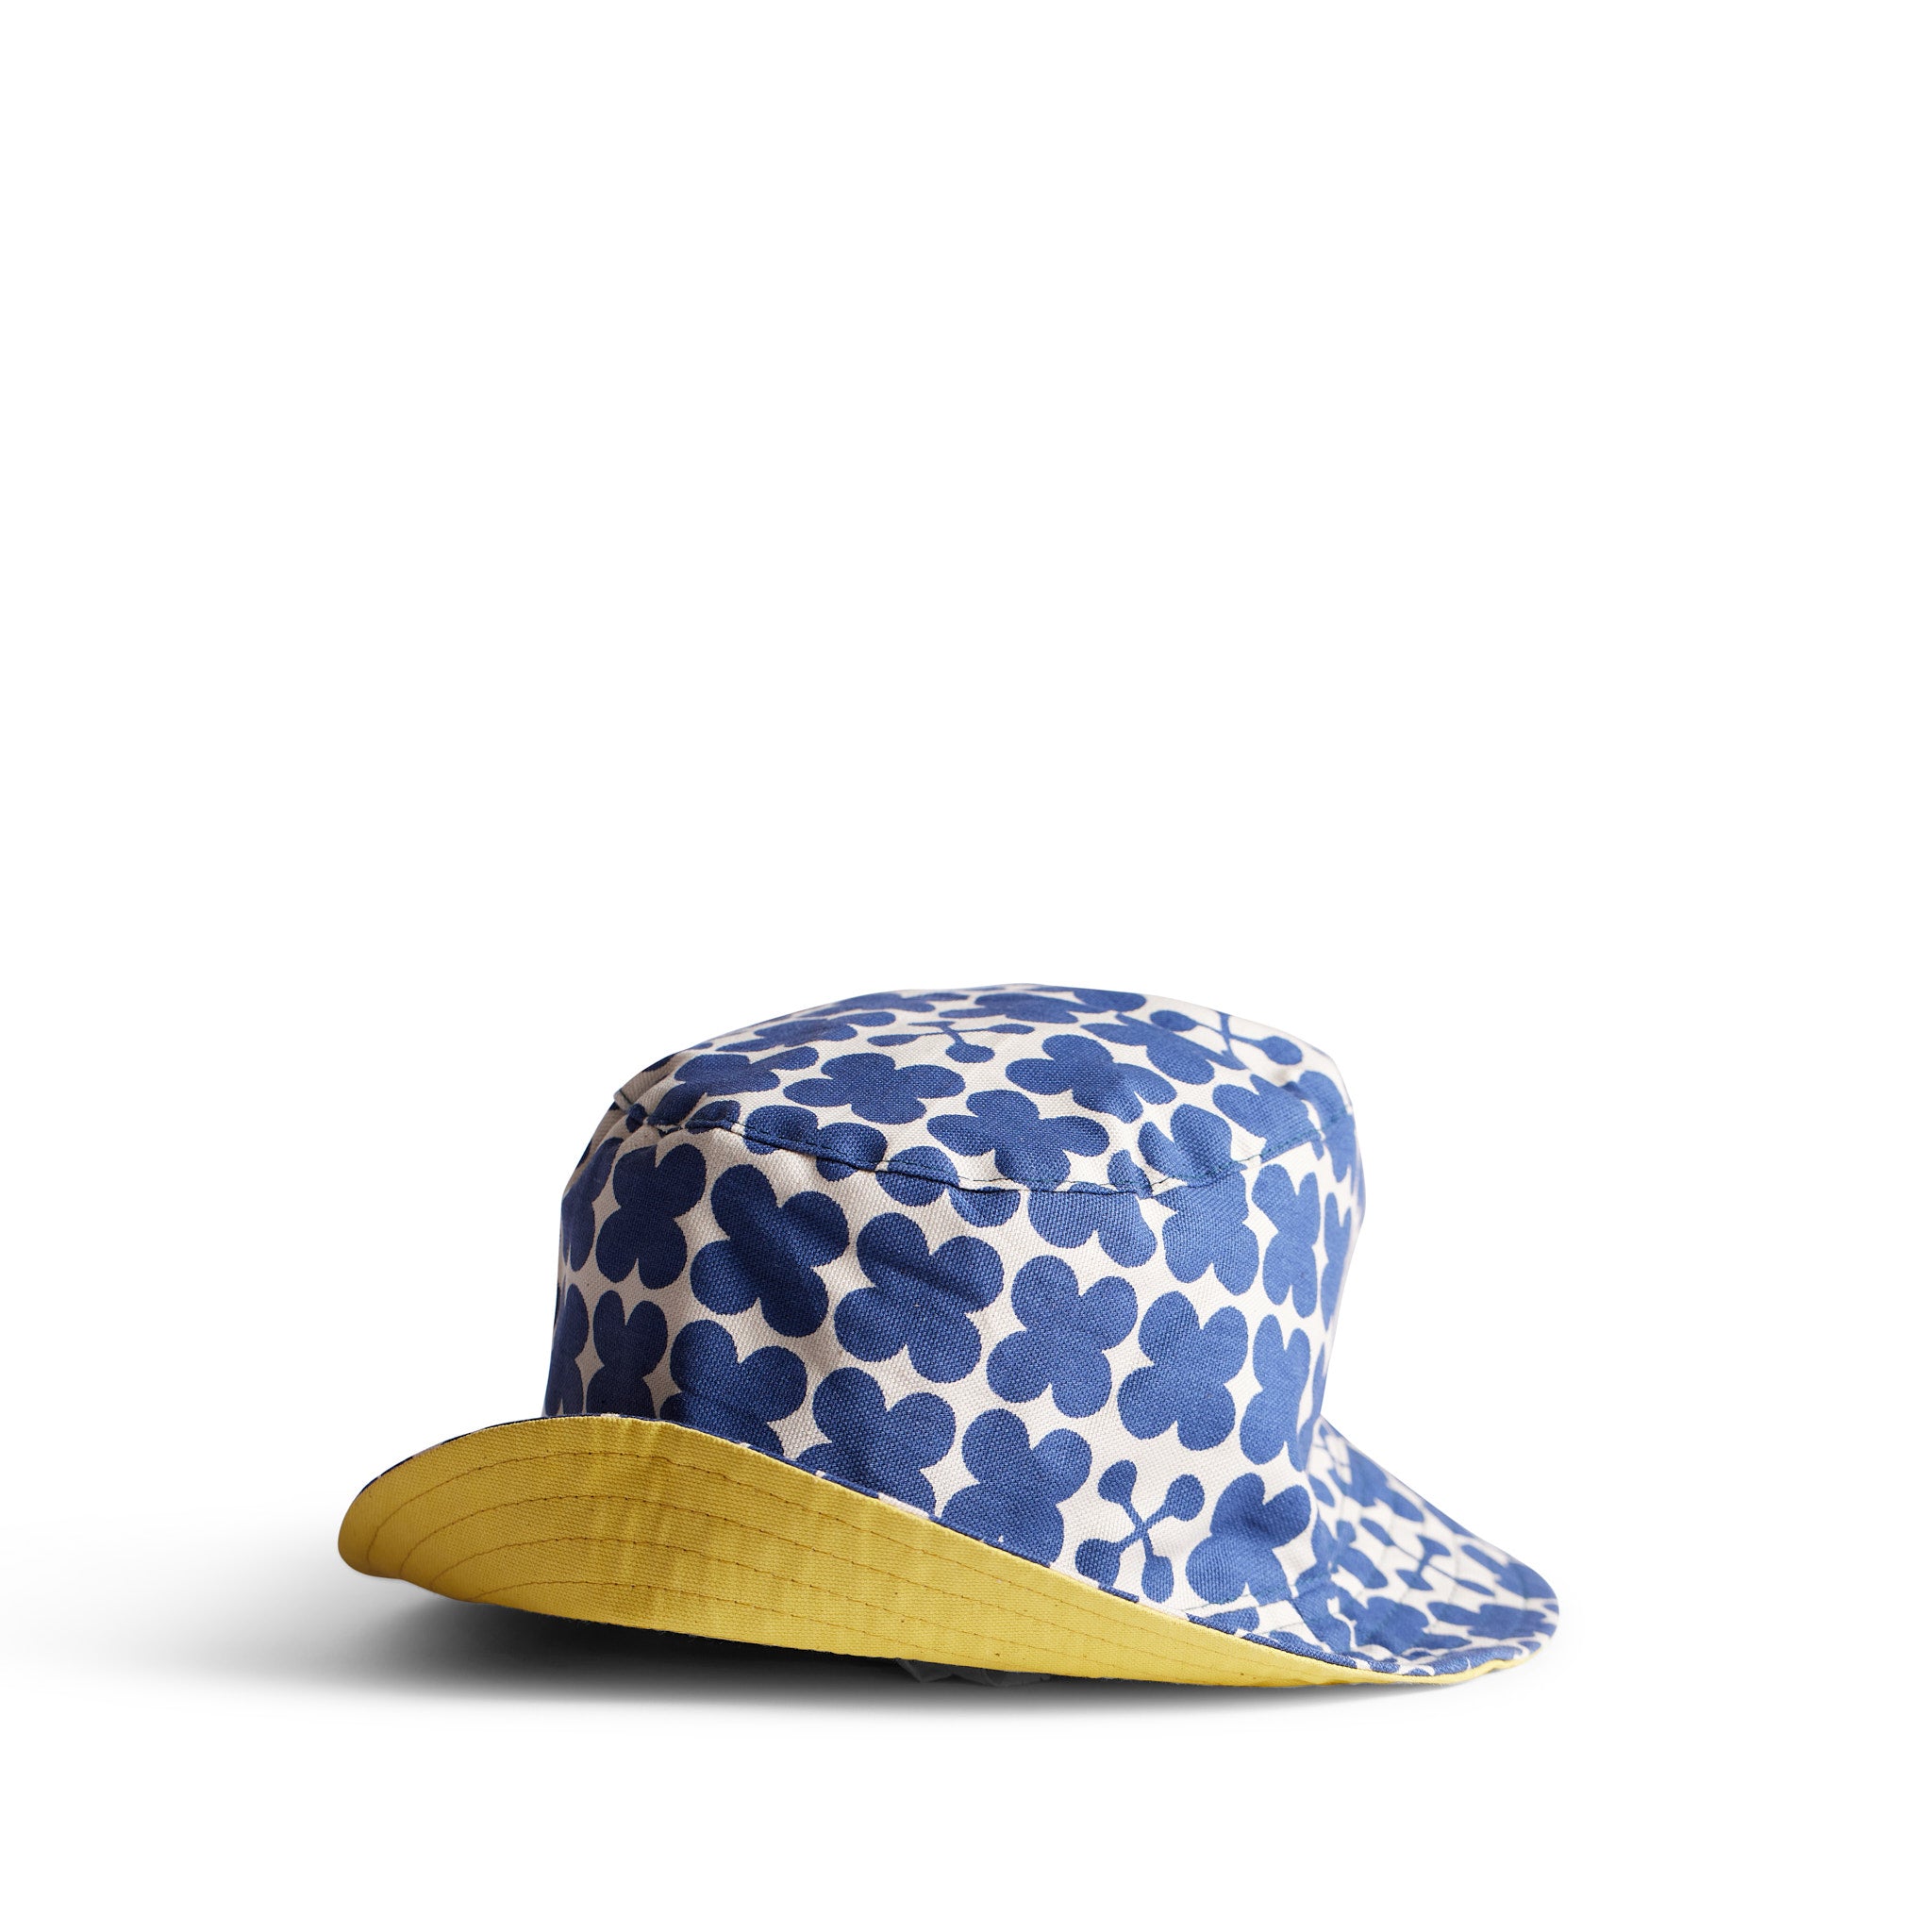 Scandi Candy Bucket Hat in Inky Blue with Lemon Lining Zoom Image 1